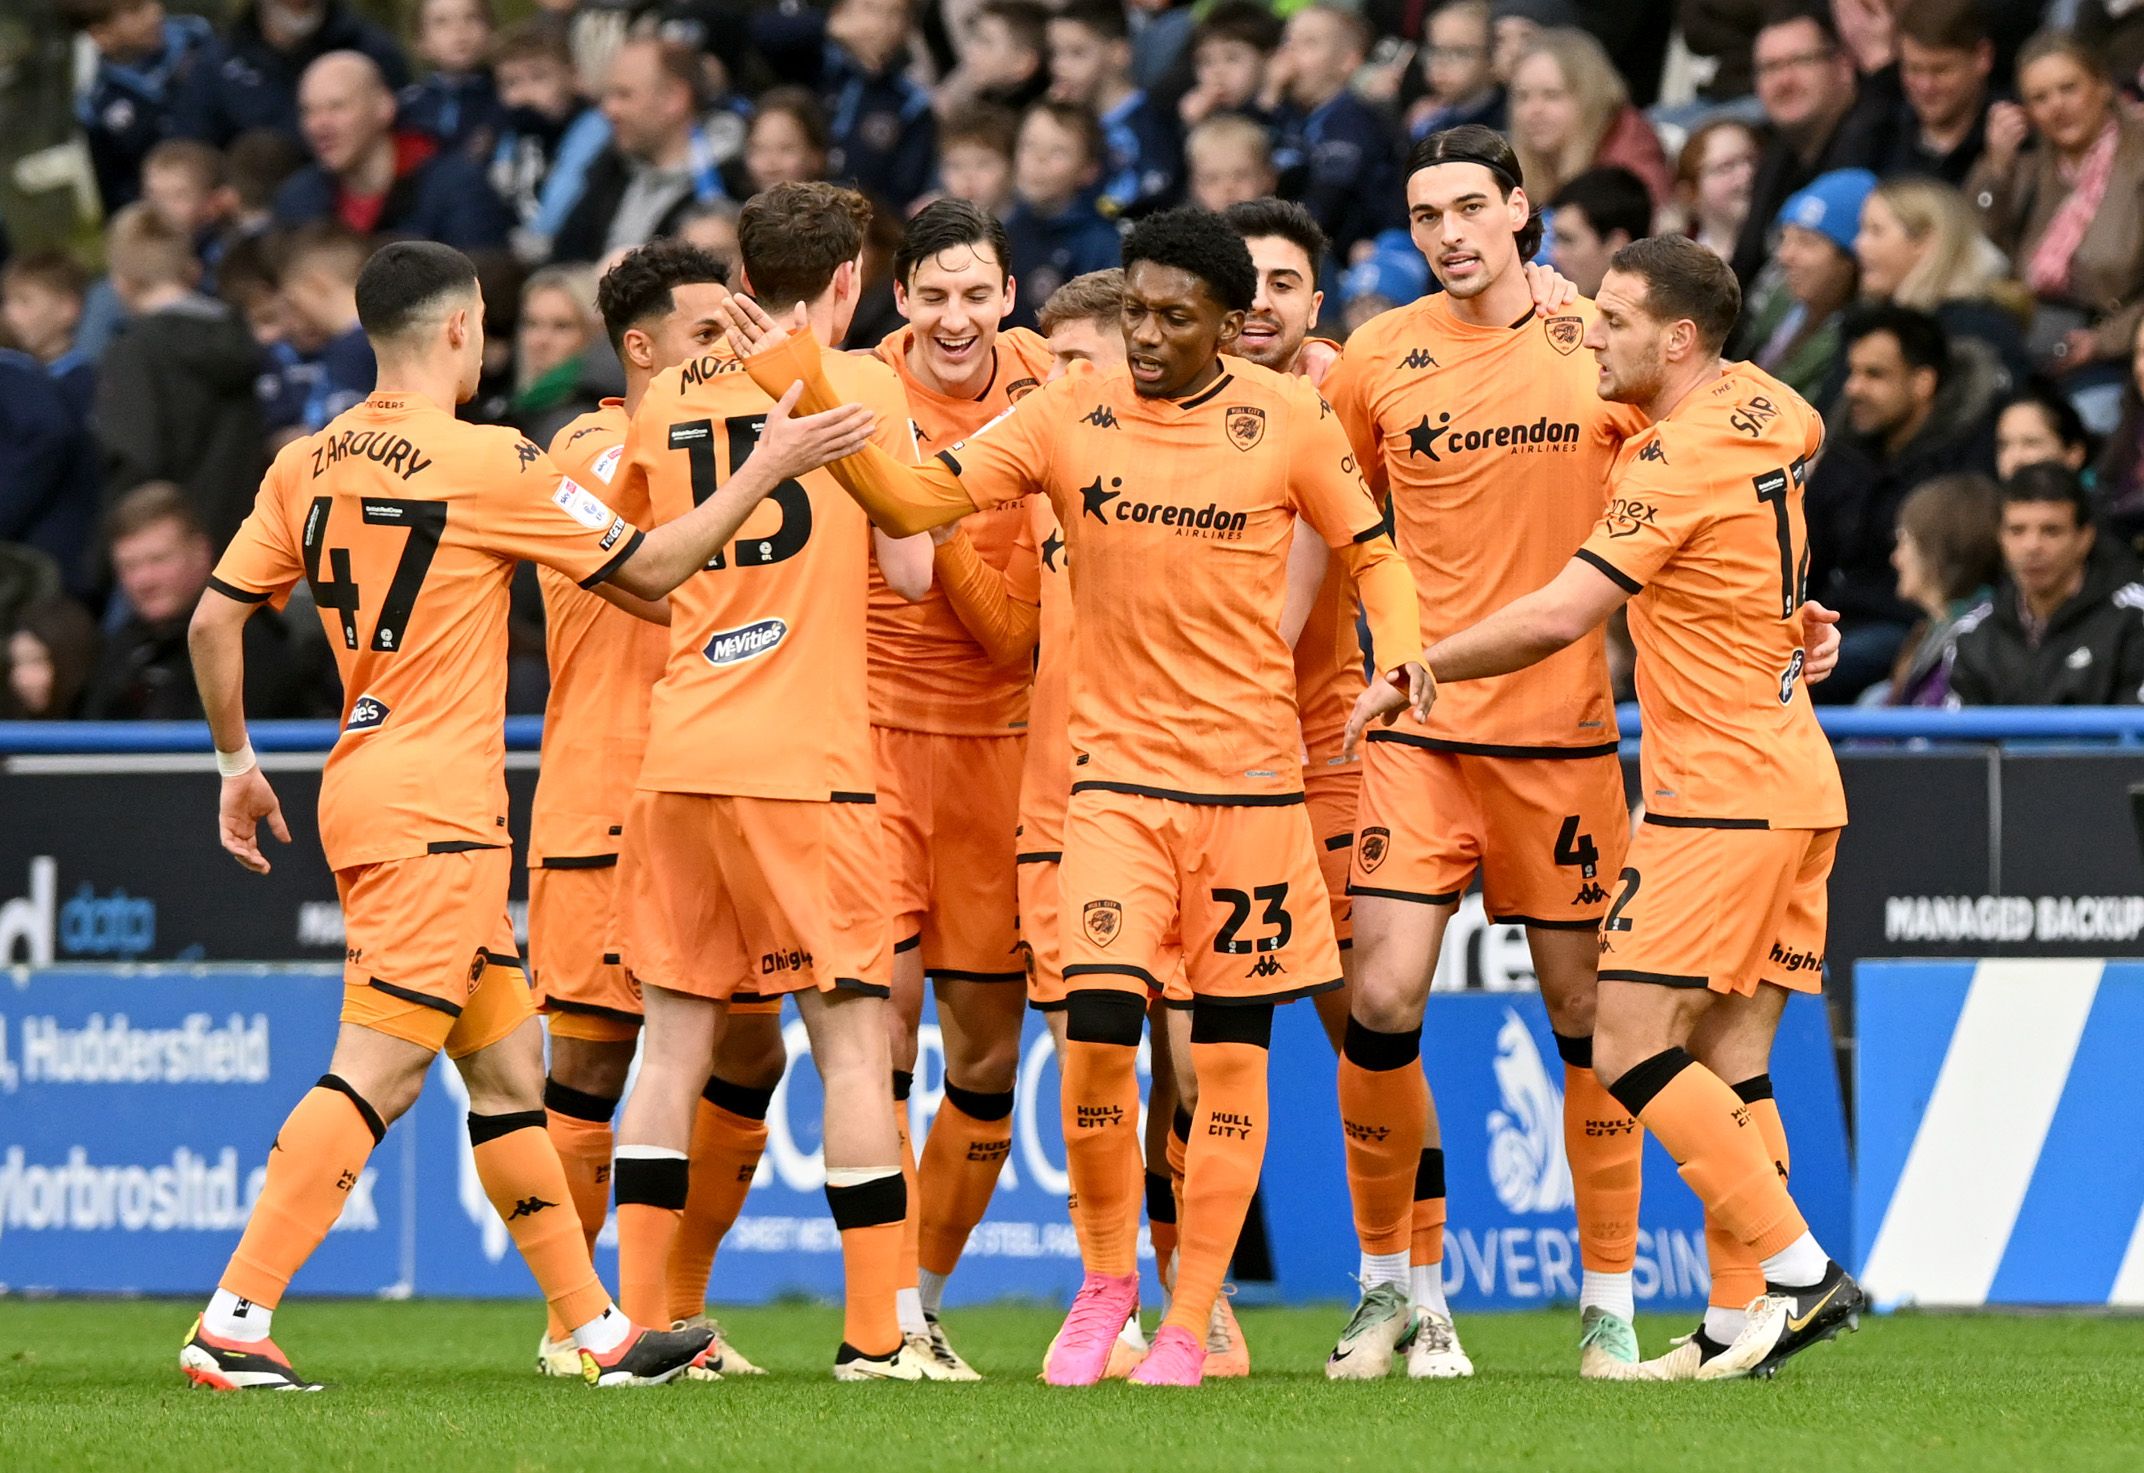 Hull City players celebrate after scoring a goal against Huddersfield 